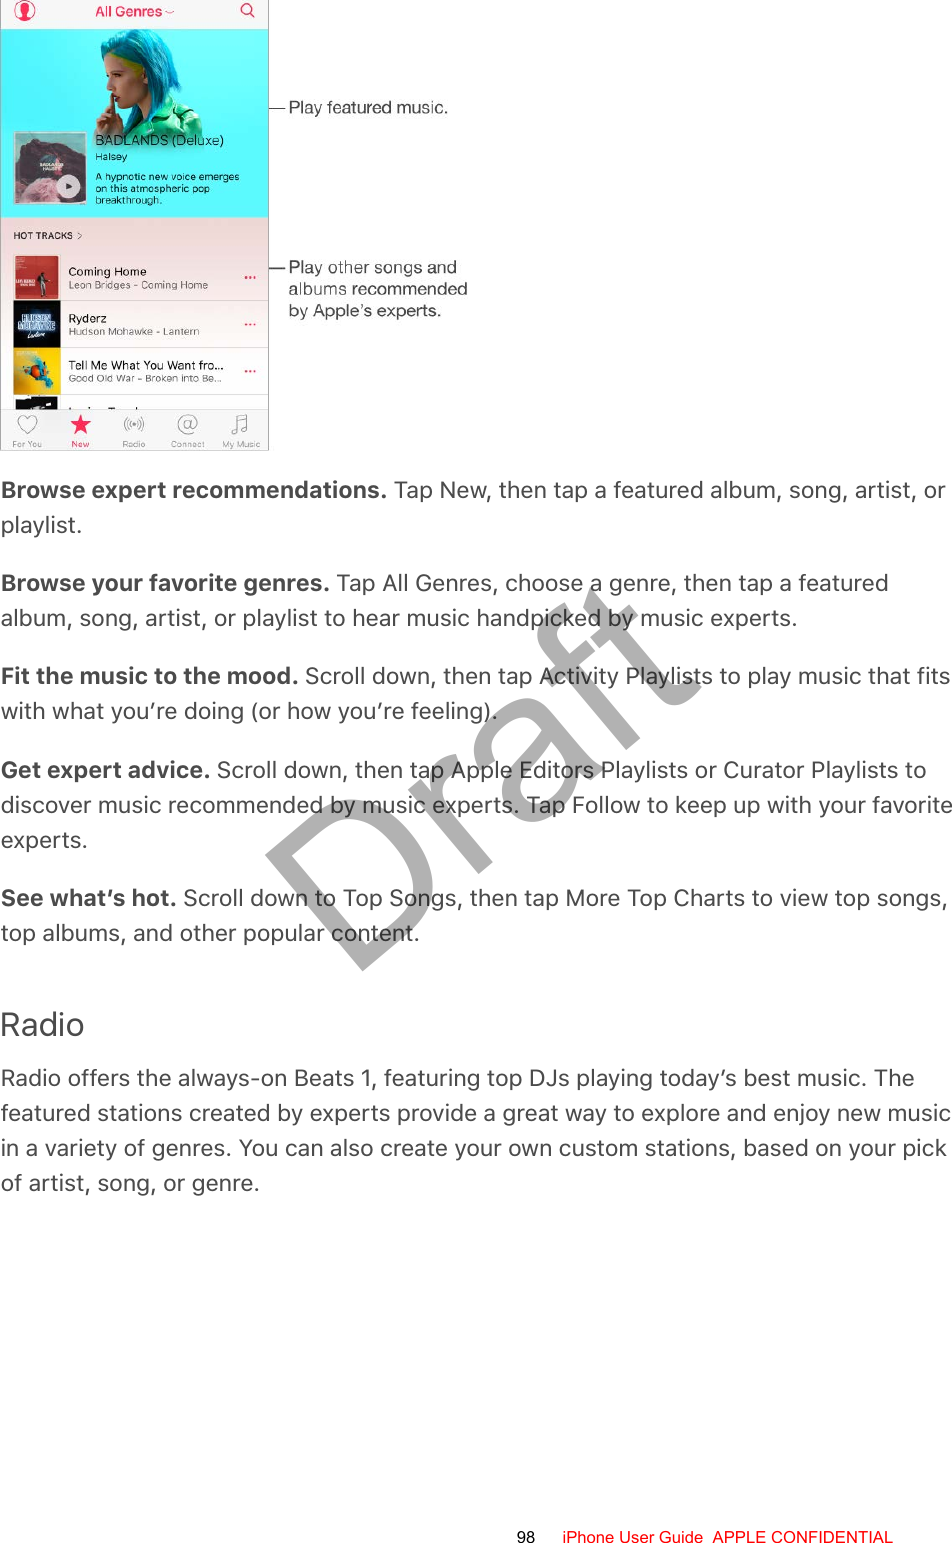 Browse expert recommendations. Tap New, then tap a featured album, song, artist, orplaylist.Browse your favorite genres. Tap All Genres, choose a genre, then tap a featuredalbum, song, artist, or playlist to hear music handpicked by music experts.Fit the music to the mood. Scroll down, then tap Activity Playlists to play music that fitswith what you’re doing (or how you’re feeling).Get expert advice. Scroll down, then tap Apple Editors Playlists or Curator Playlists todiscover music recommended by music experts. Tap Follow to keep up with your favoriteexperts.See what’s hot. Scroll down to Top Songs, then tap More Top Charts to view top songs,top albums, and other popular content.RadioRadio offers the always-on Beats 1, featuring top DJs playing today’s best music. Thefeatured stations created by experts provide a great way to explore and enjoy new musicin a variety of genres. You can also create your own custom stations, based on your pickof artist, song, or genre.98 iPhone User Guide  APPLE CONFIDENTIALDraft